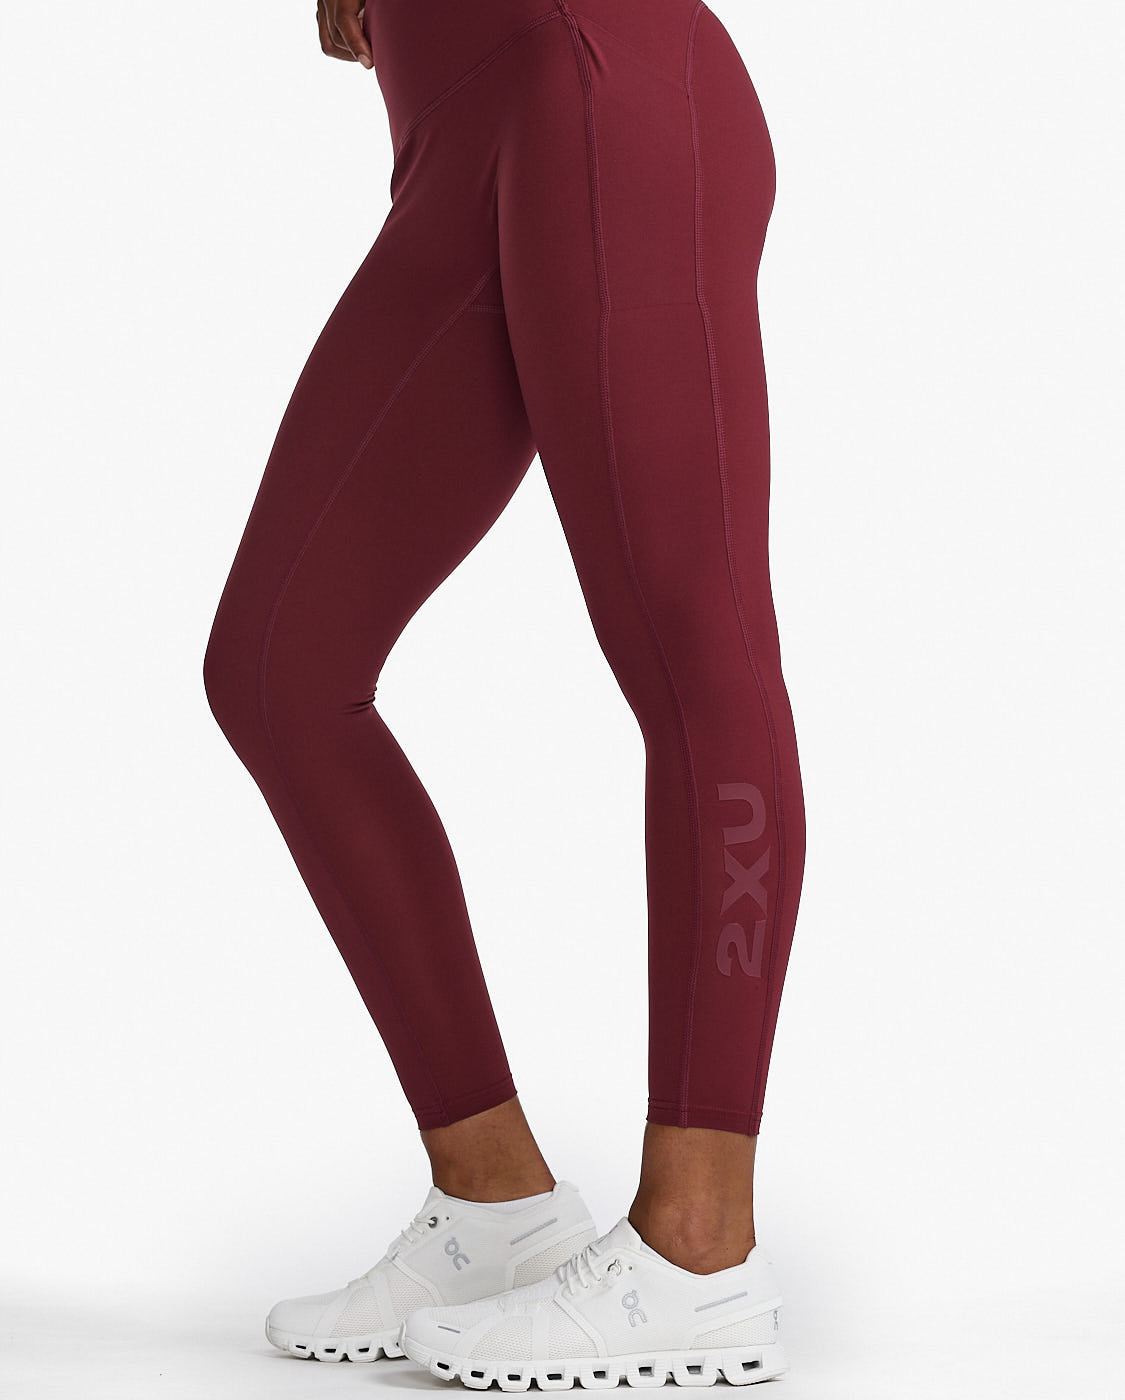 EMFURE Burgundy Women's Sports Tights Double Pocket Firming Tights